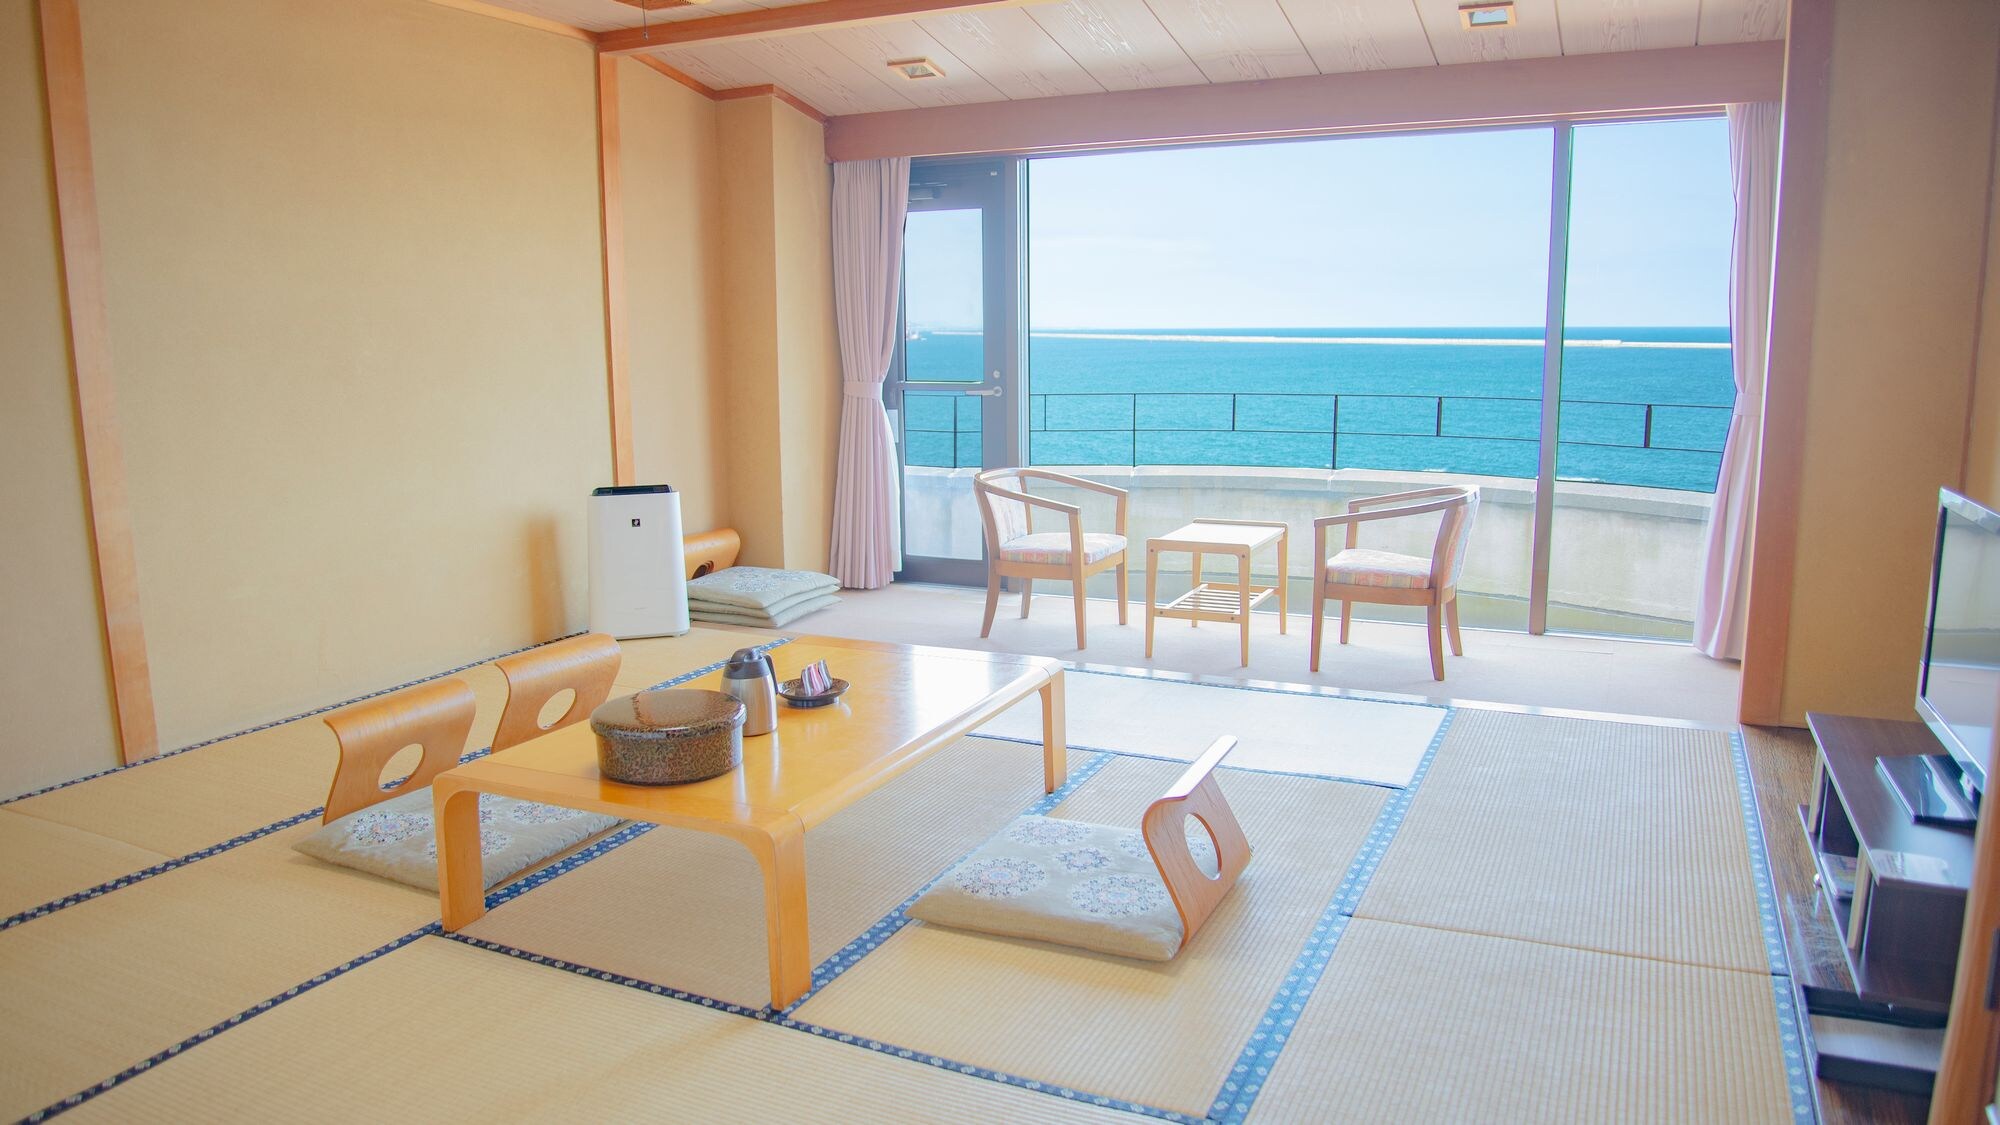 3rd floor sea side guest room with superb ocean view